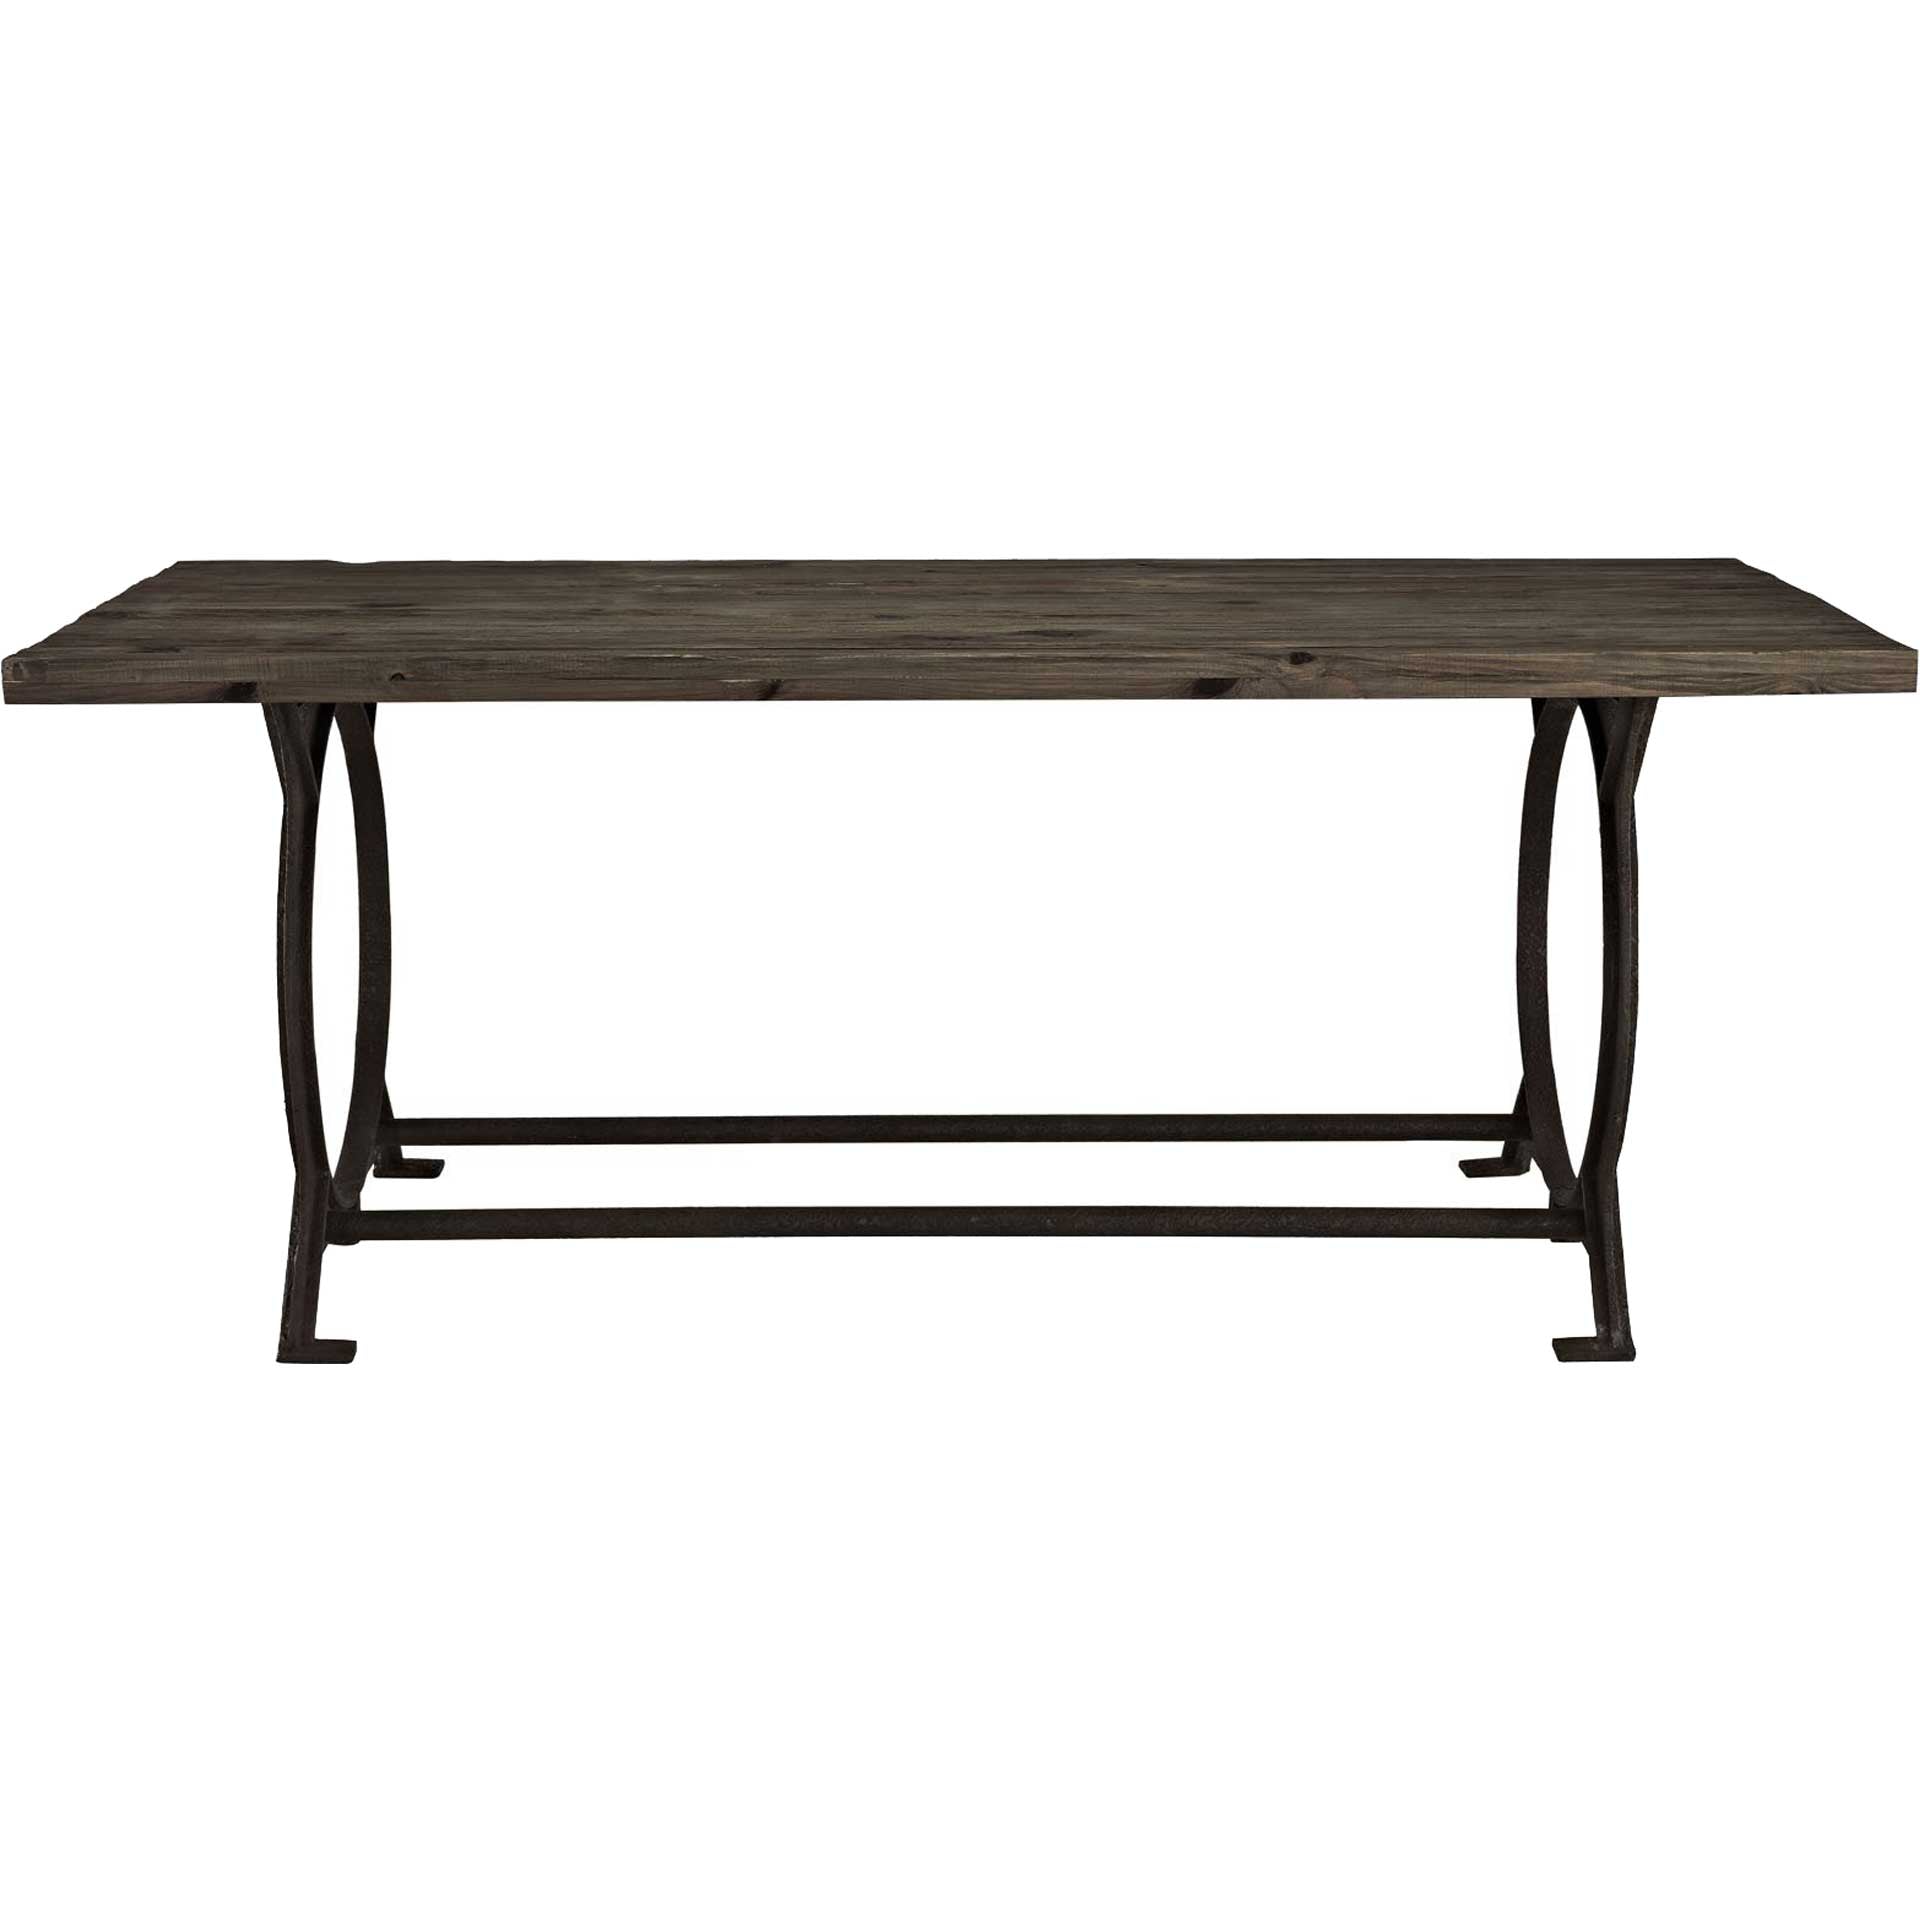 Entei Wood Top Dining Table Brown